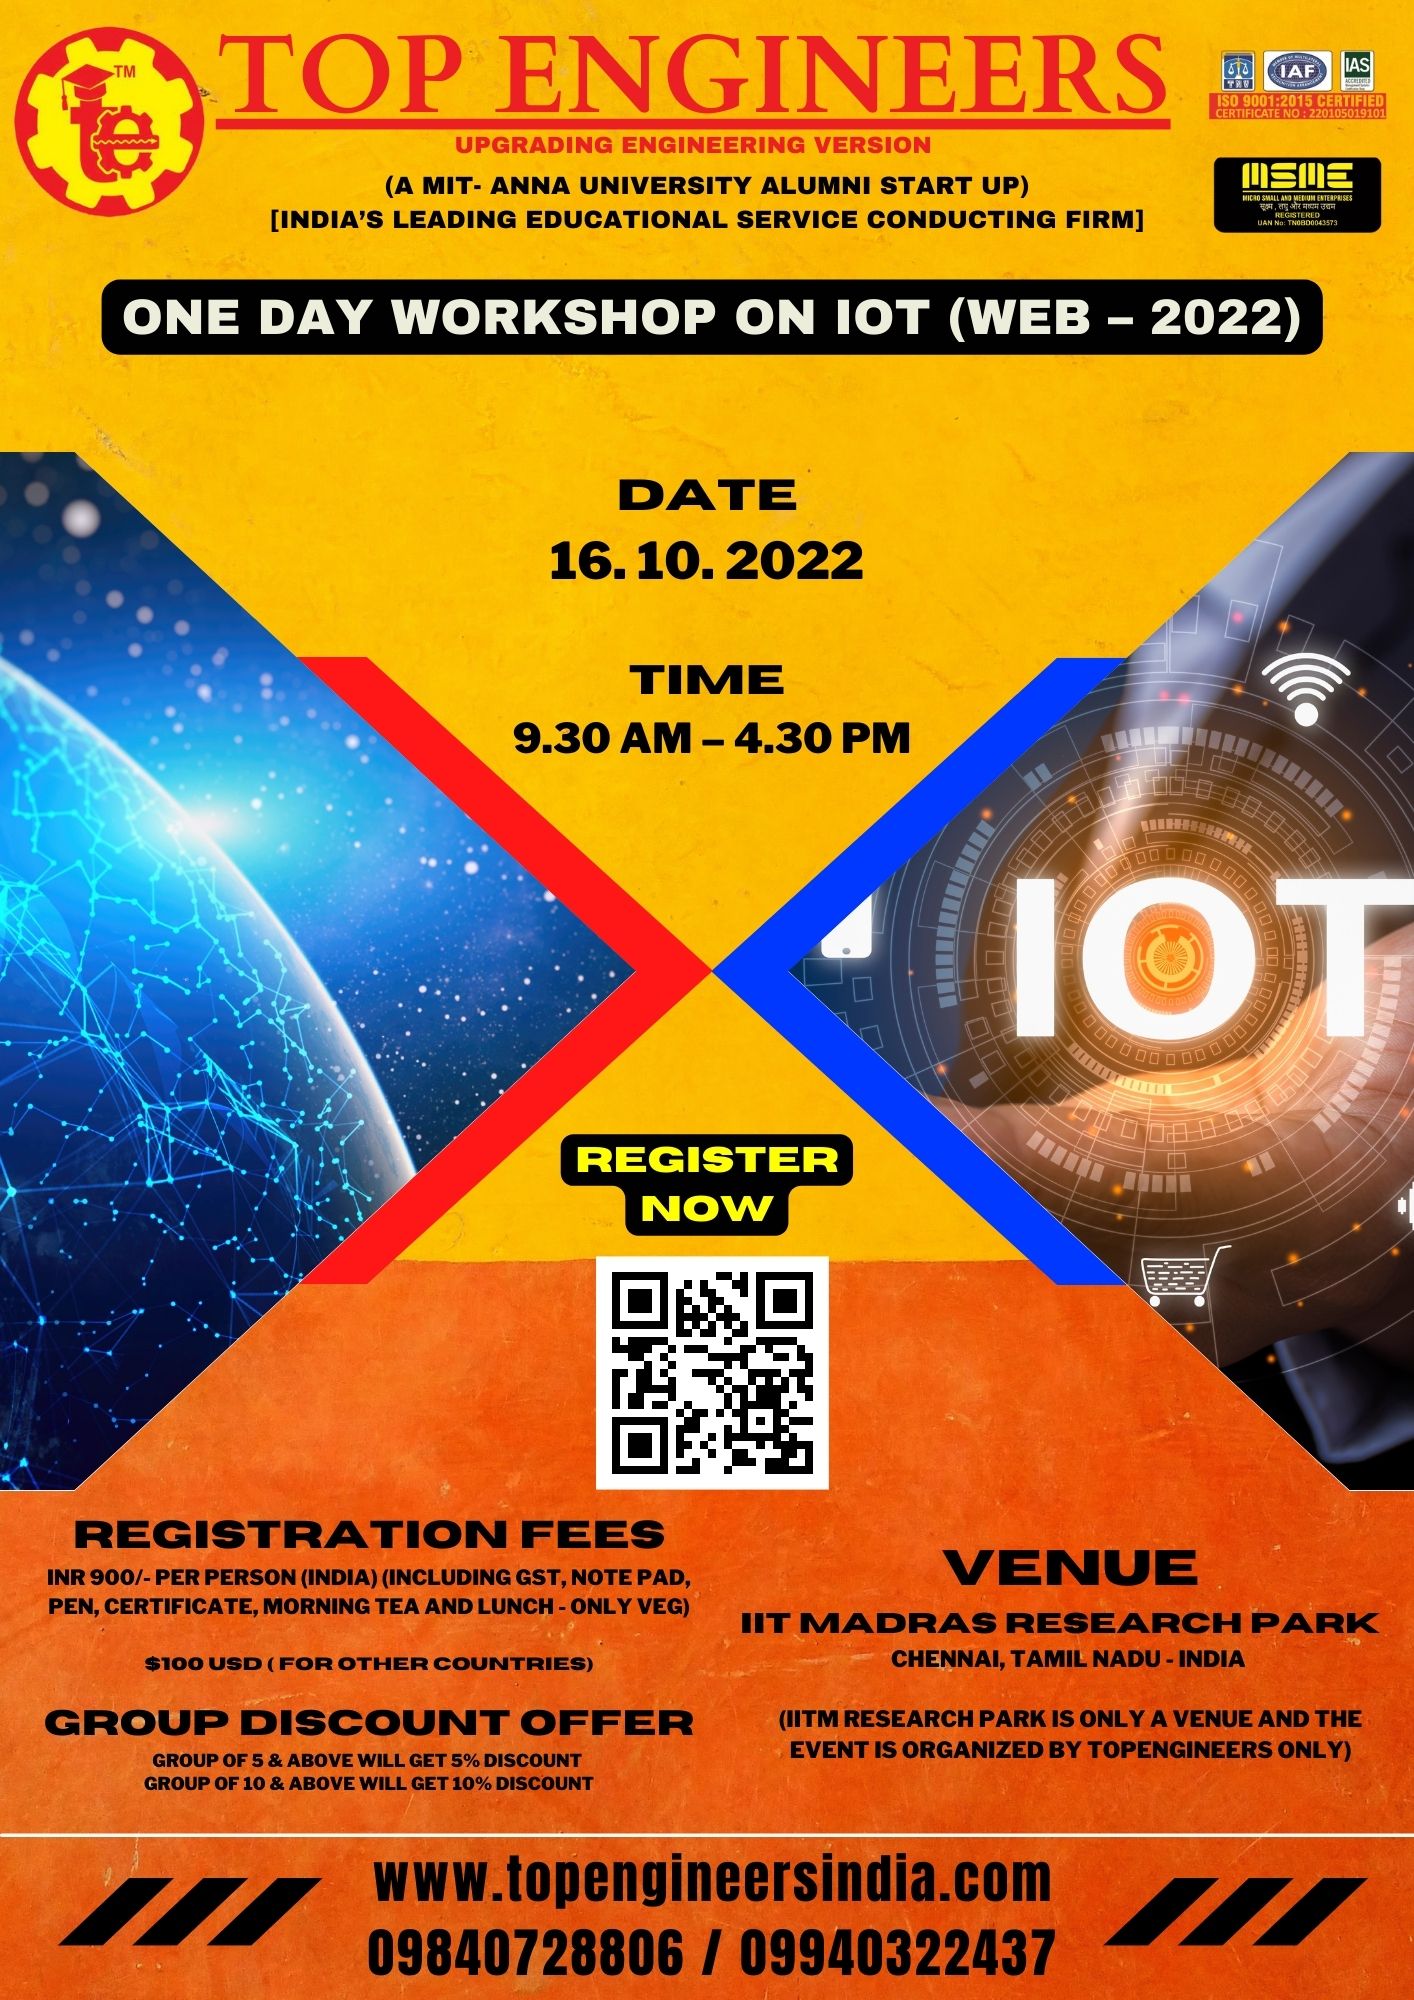 One Day Workshop on IoT (Web 2022)